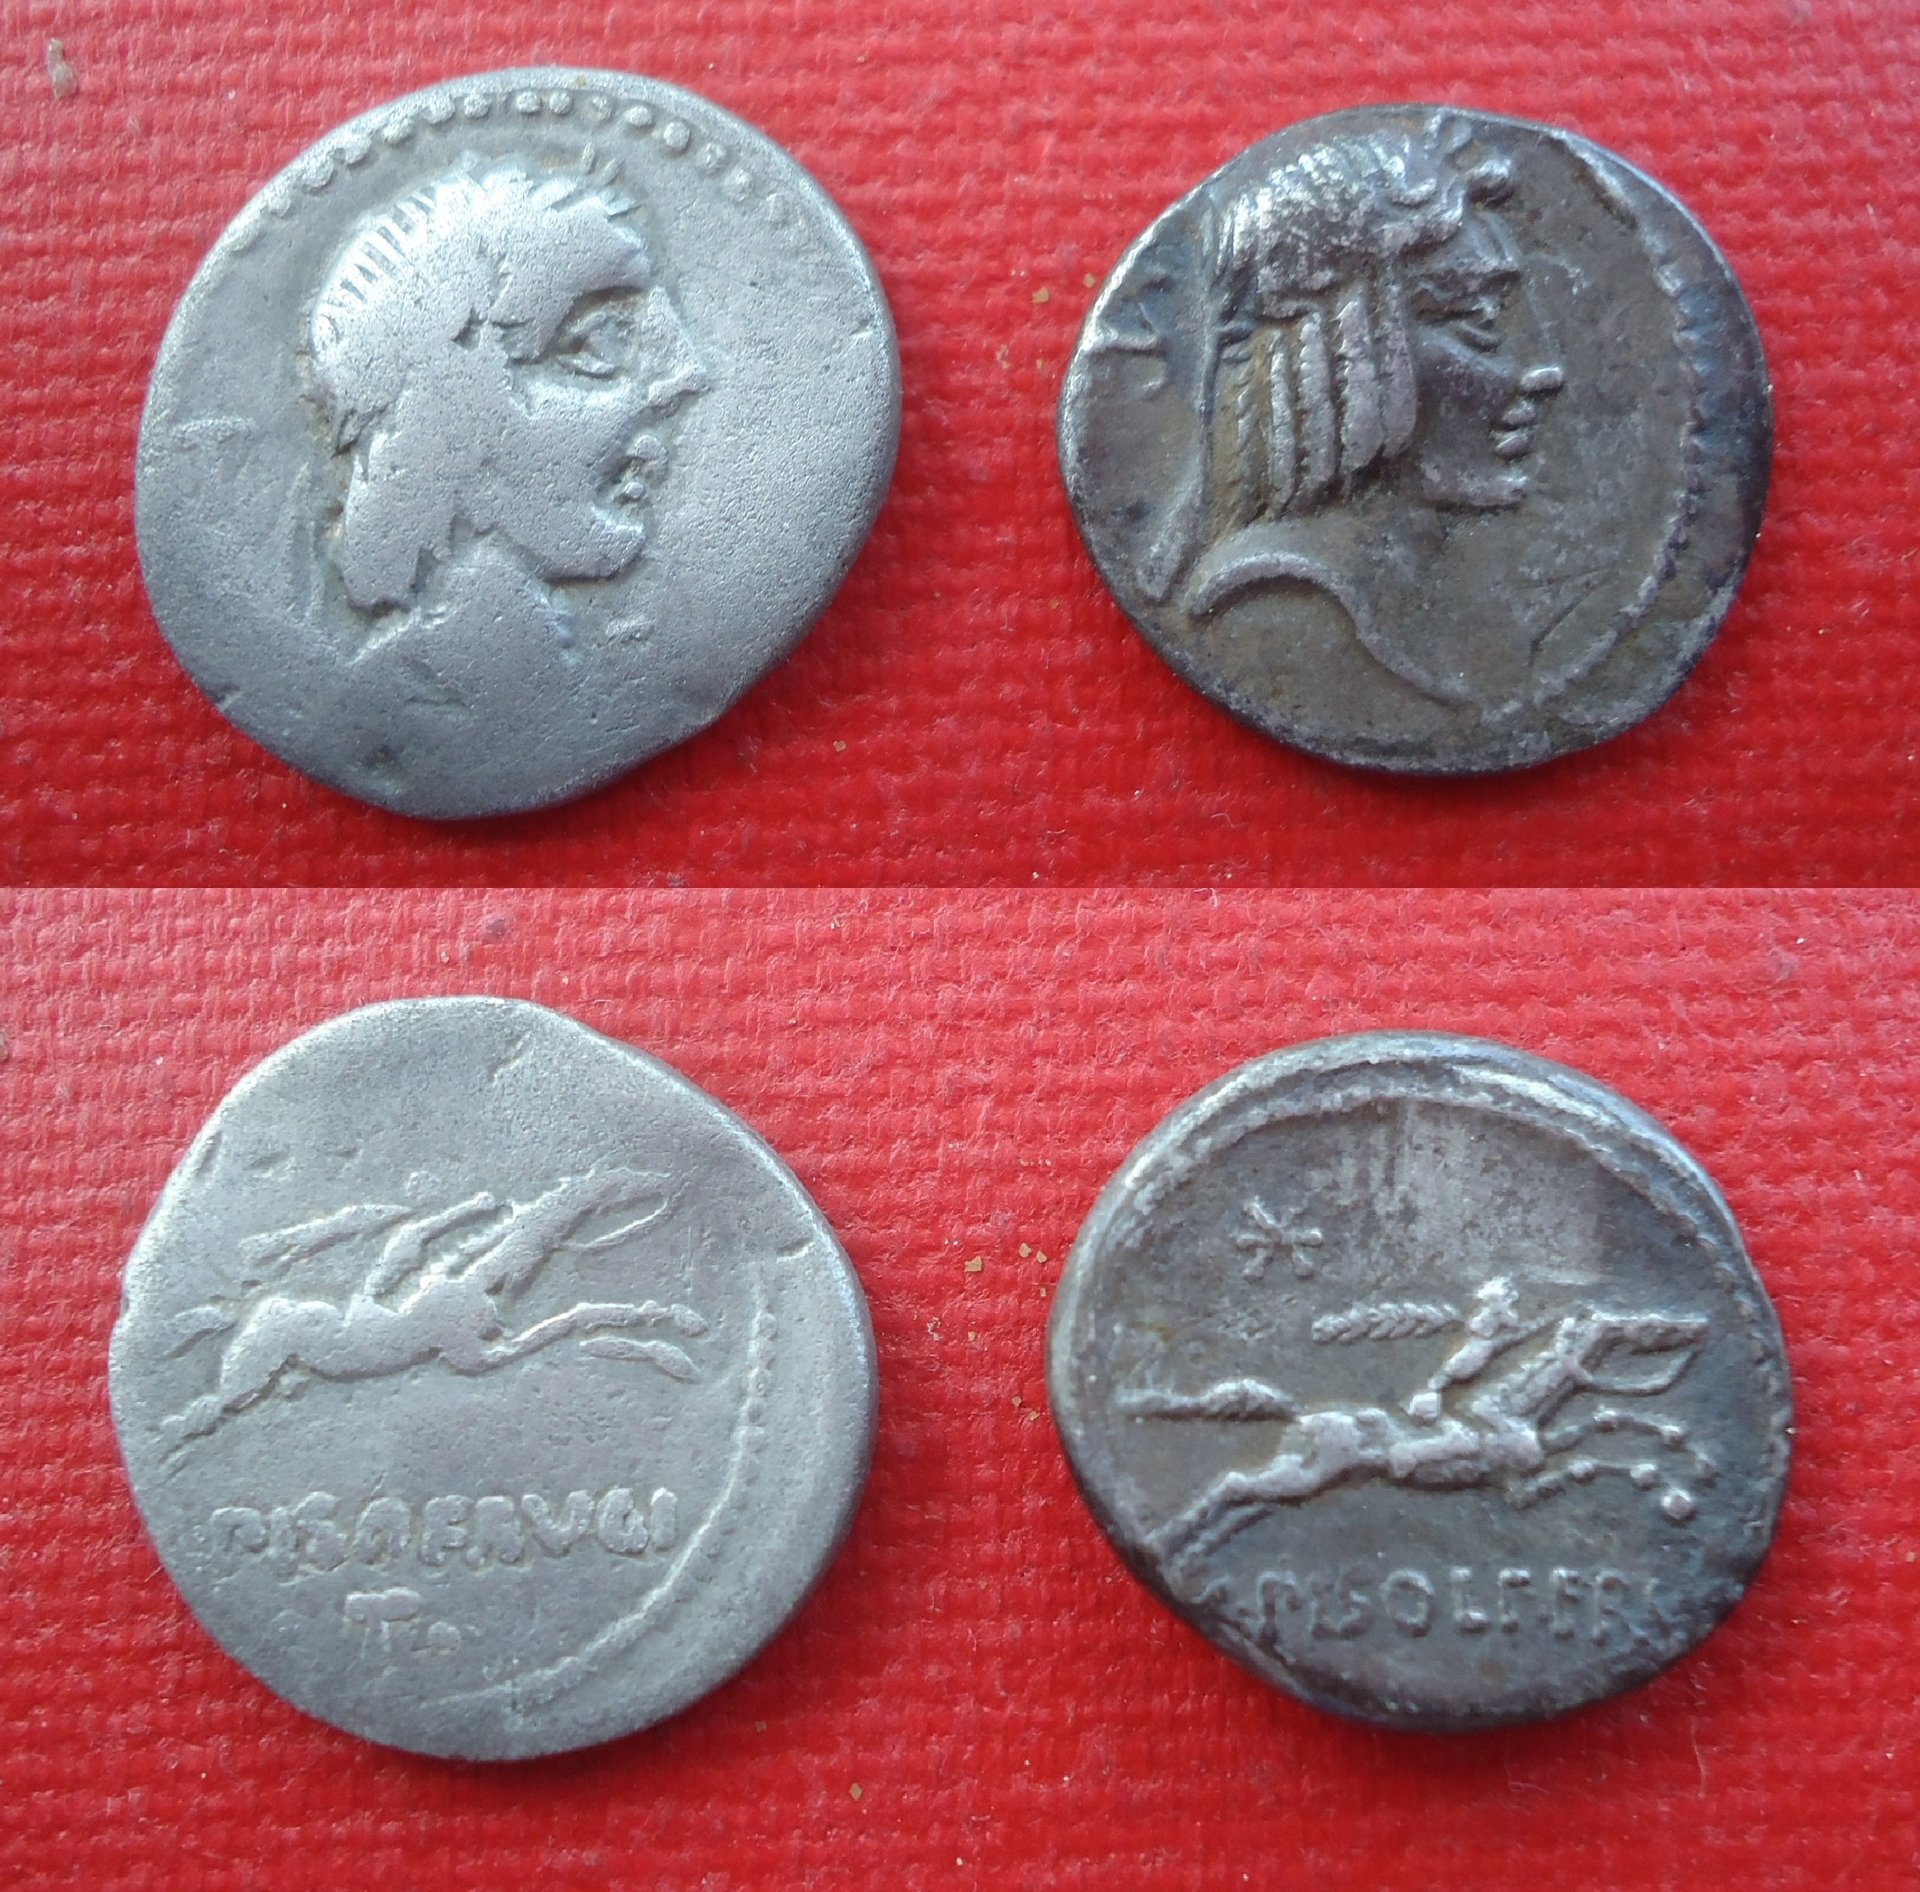 RR - Piso Frugi 90 and 67 BC 1989 & 2017 (0).jpg